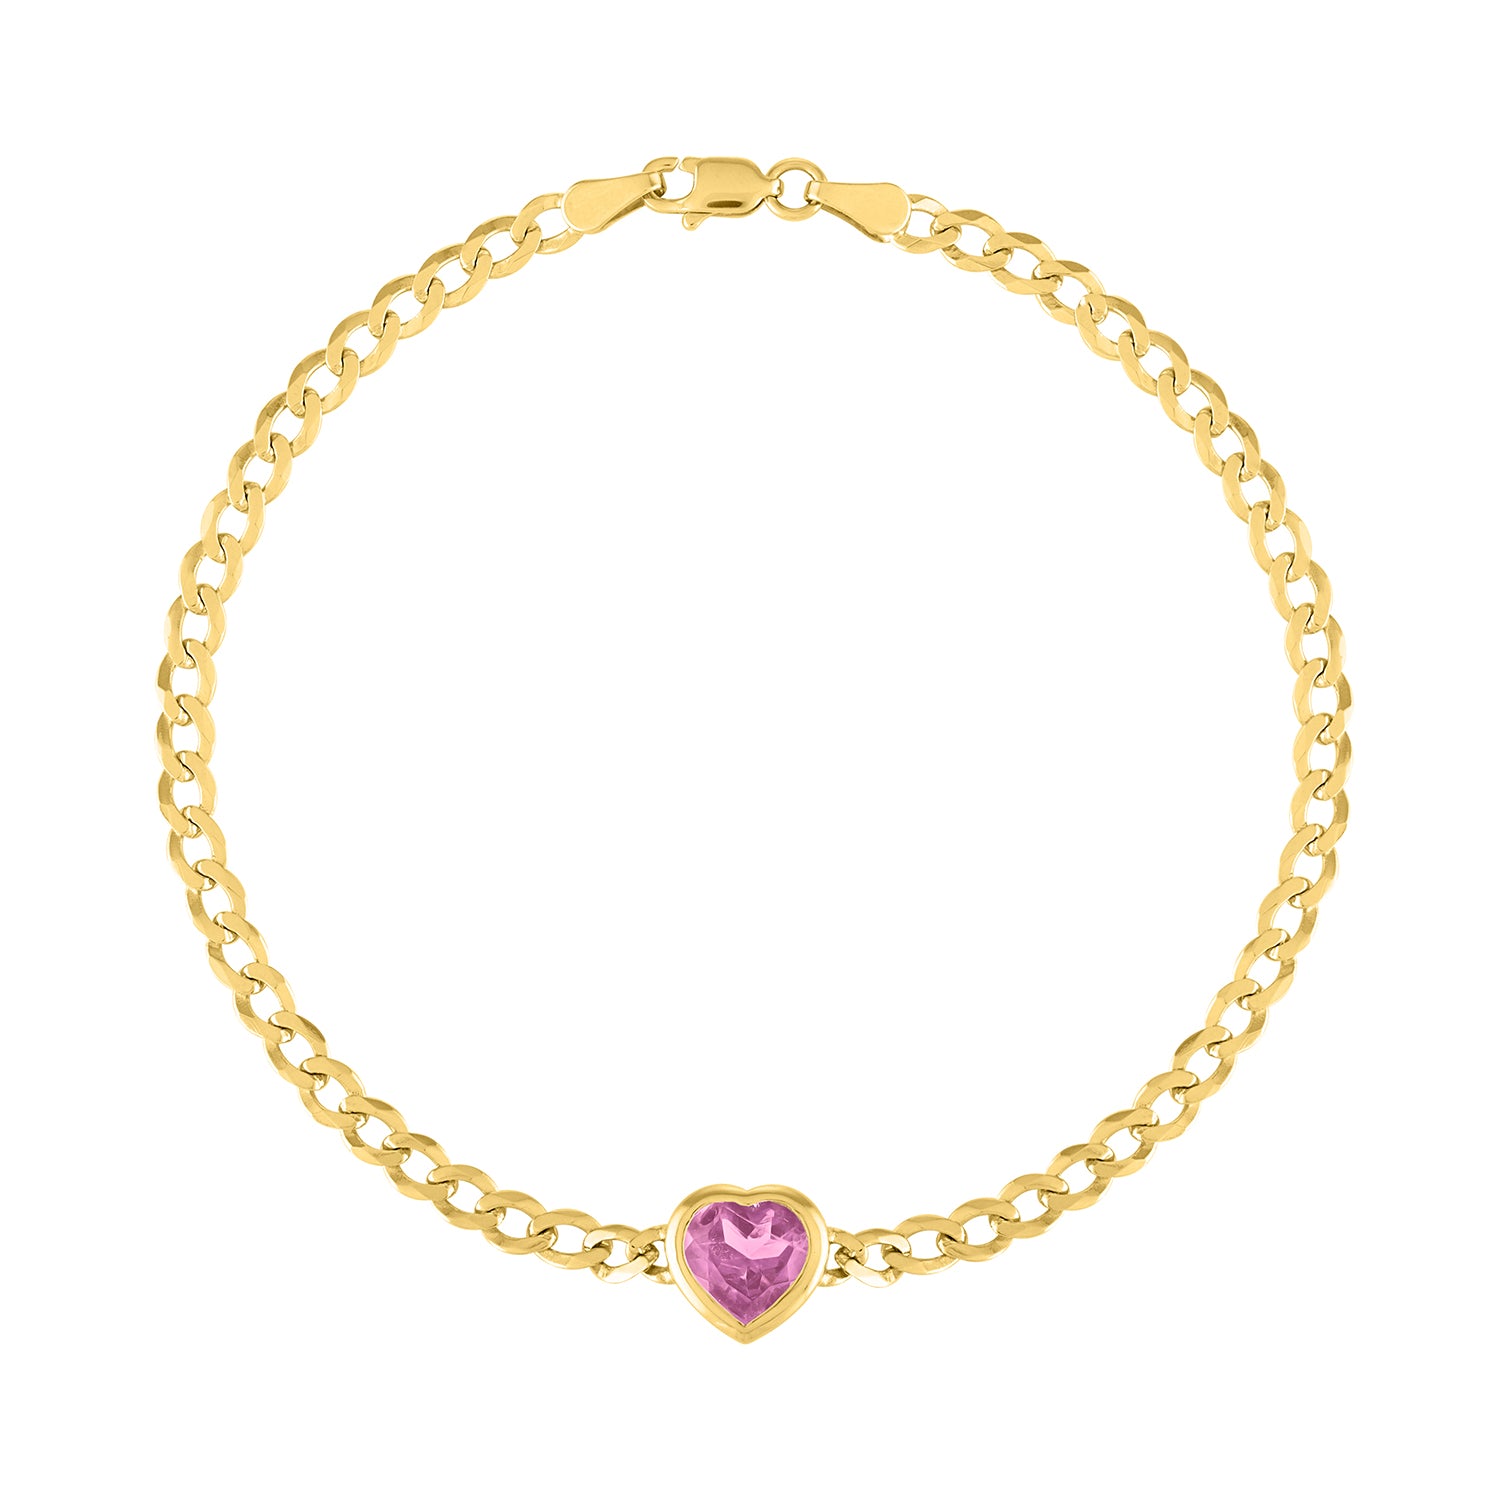 Yellow gold cuban link chain bracelet with a heart shaped bezeled pink tourmaline in the center.